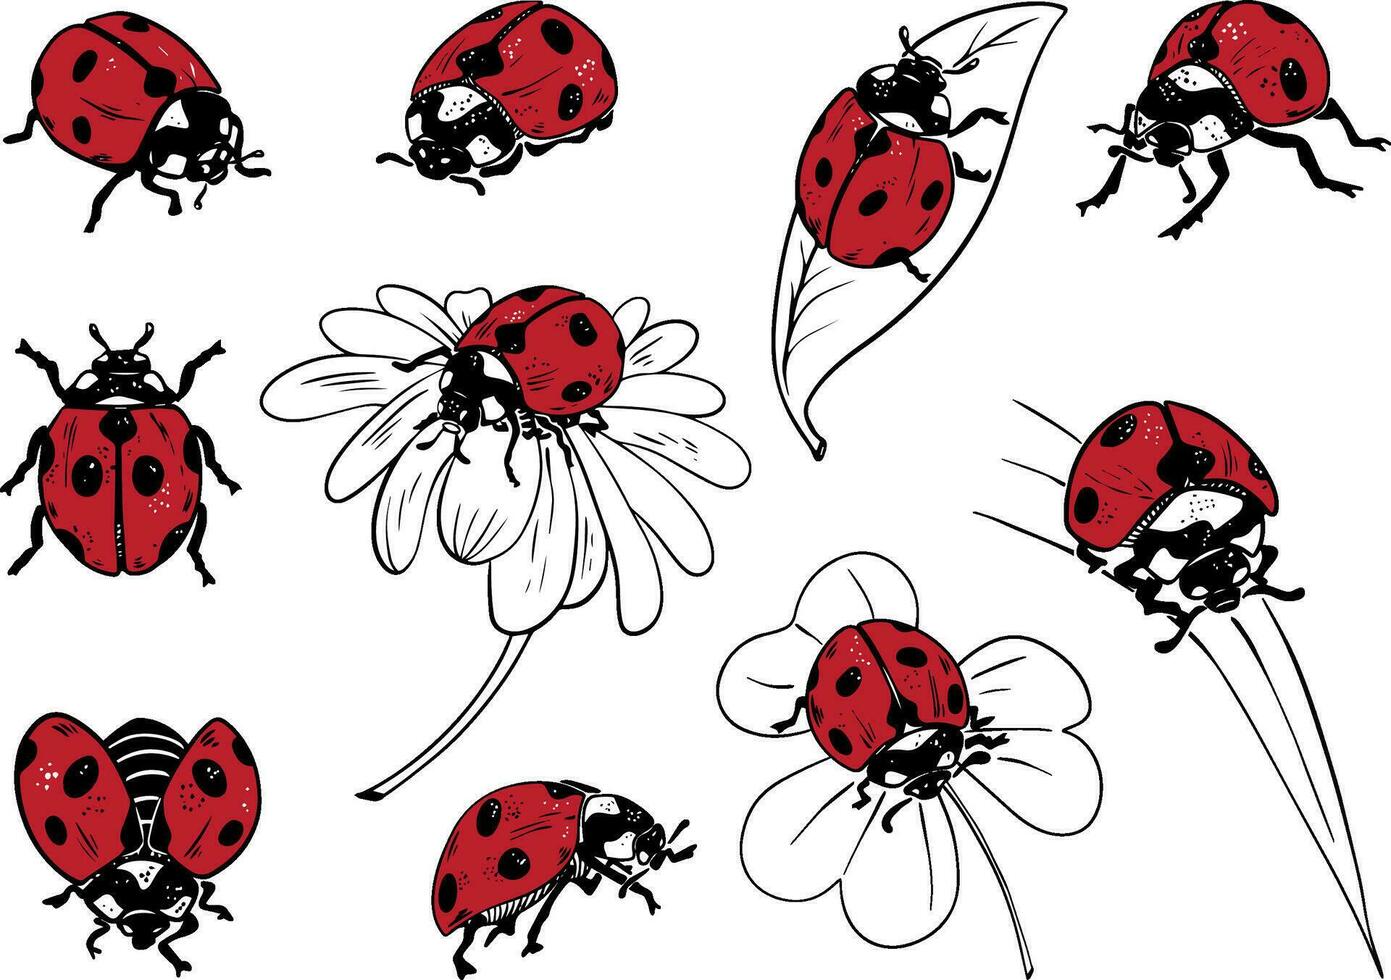 Sketch style ladybug set illustration black lineart red fill isolated on white background vector